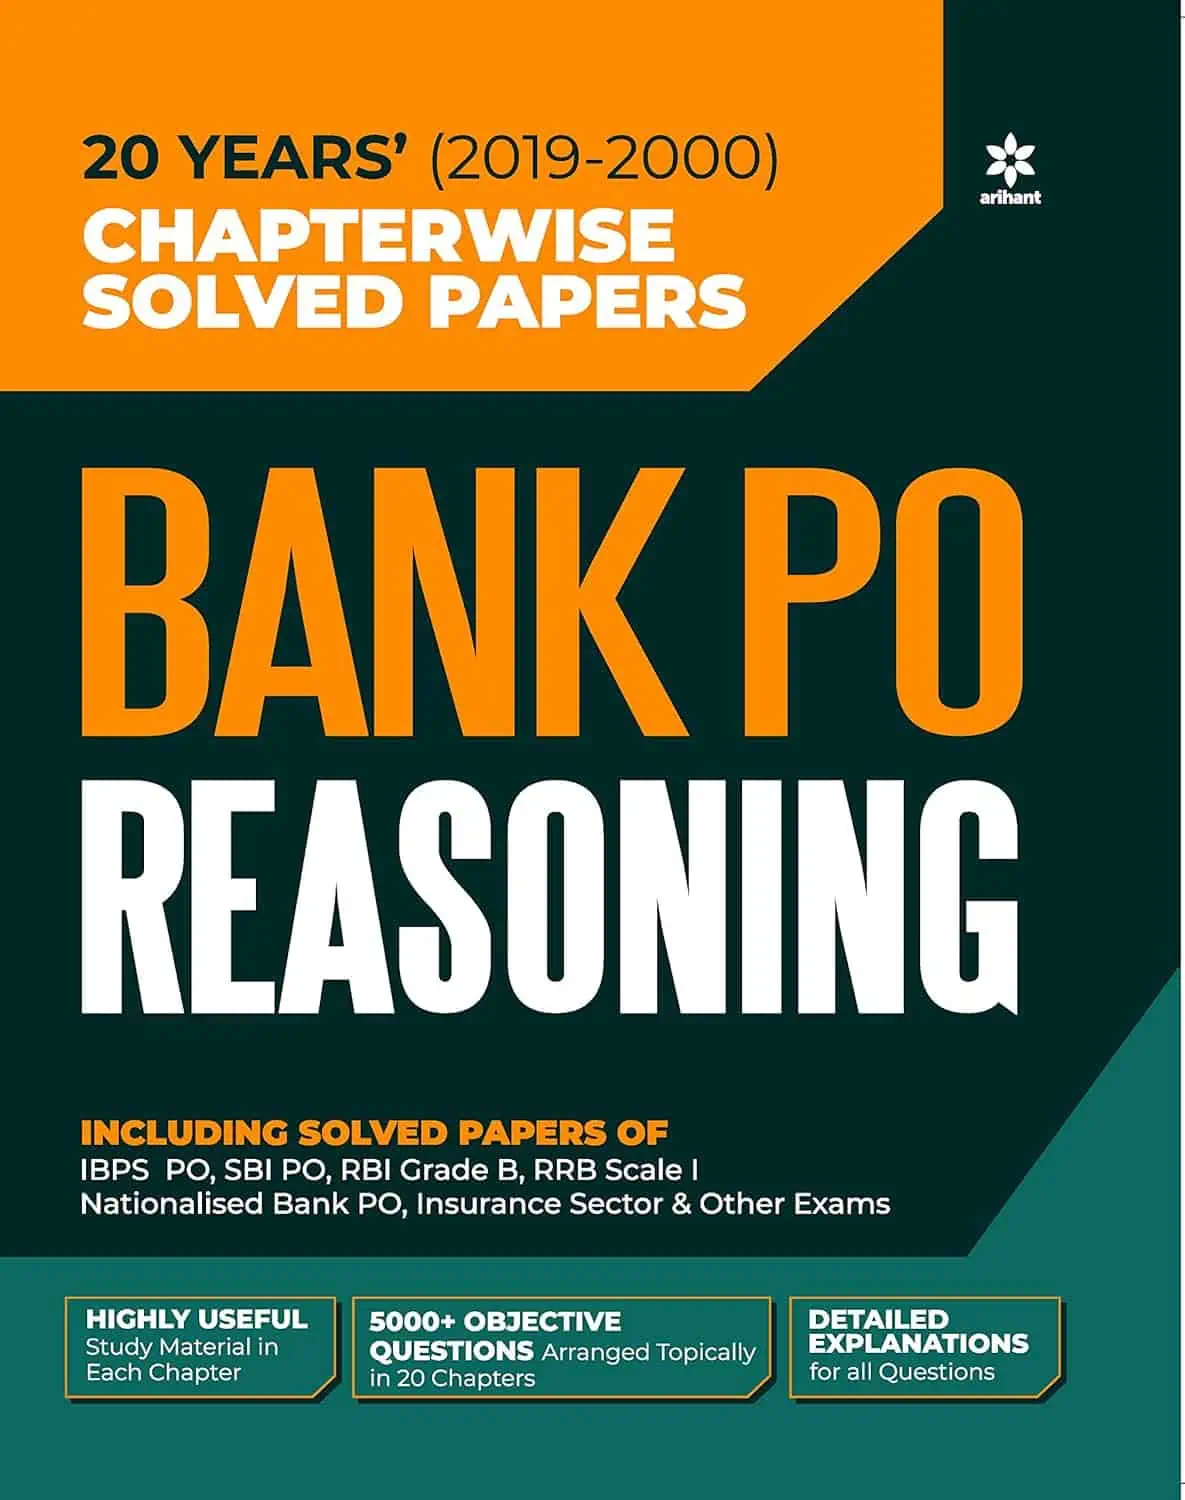 Arihant BANK PO Reasoning Chapterwise Solved Papers PDF